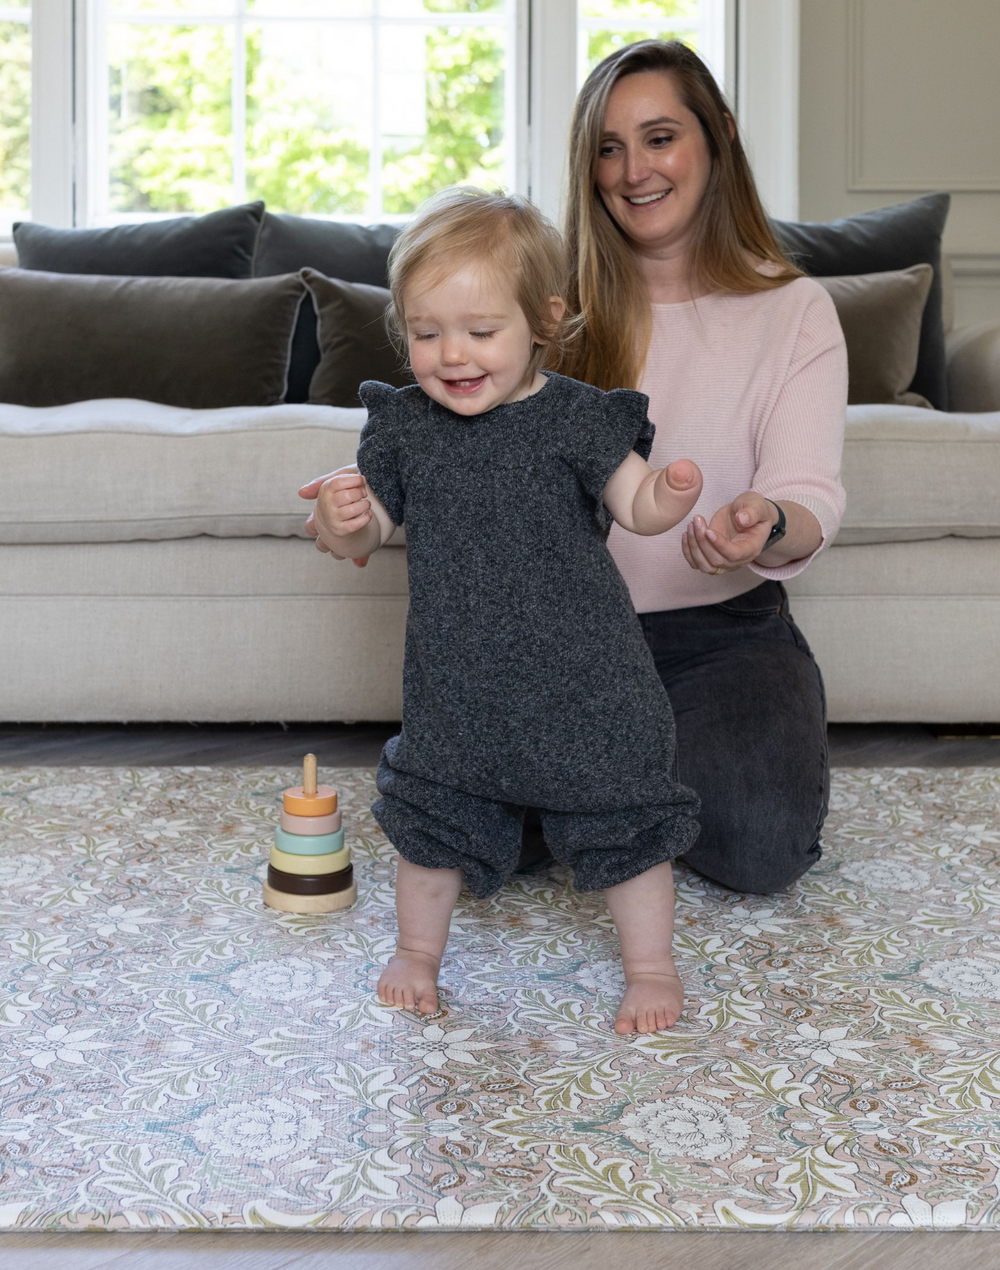 mum and baby playing on totter and tumble padded playmat foam play mat in morris & co heritage design severn, toddlers learning to walk on comfy padded playrug non slip textured surface easy to clean and wipedown washable play mat one piece and reversible to suit your family home